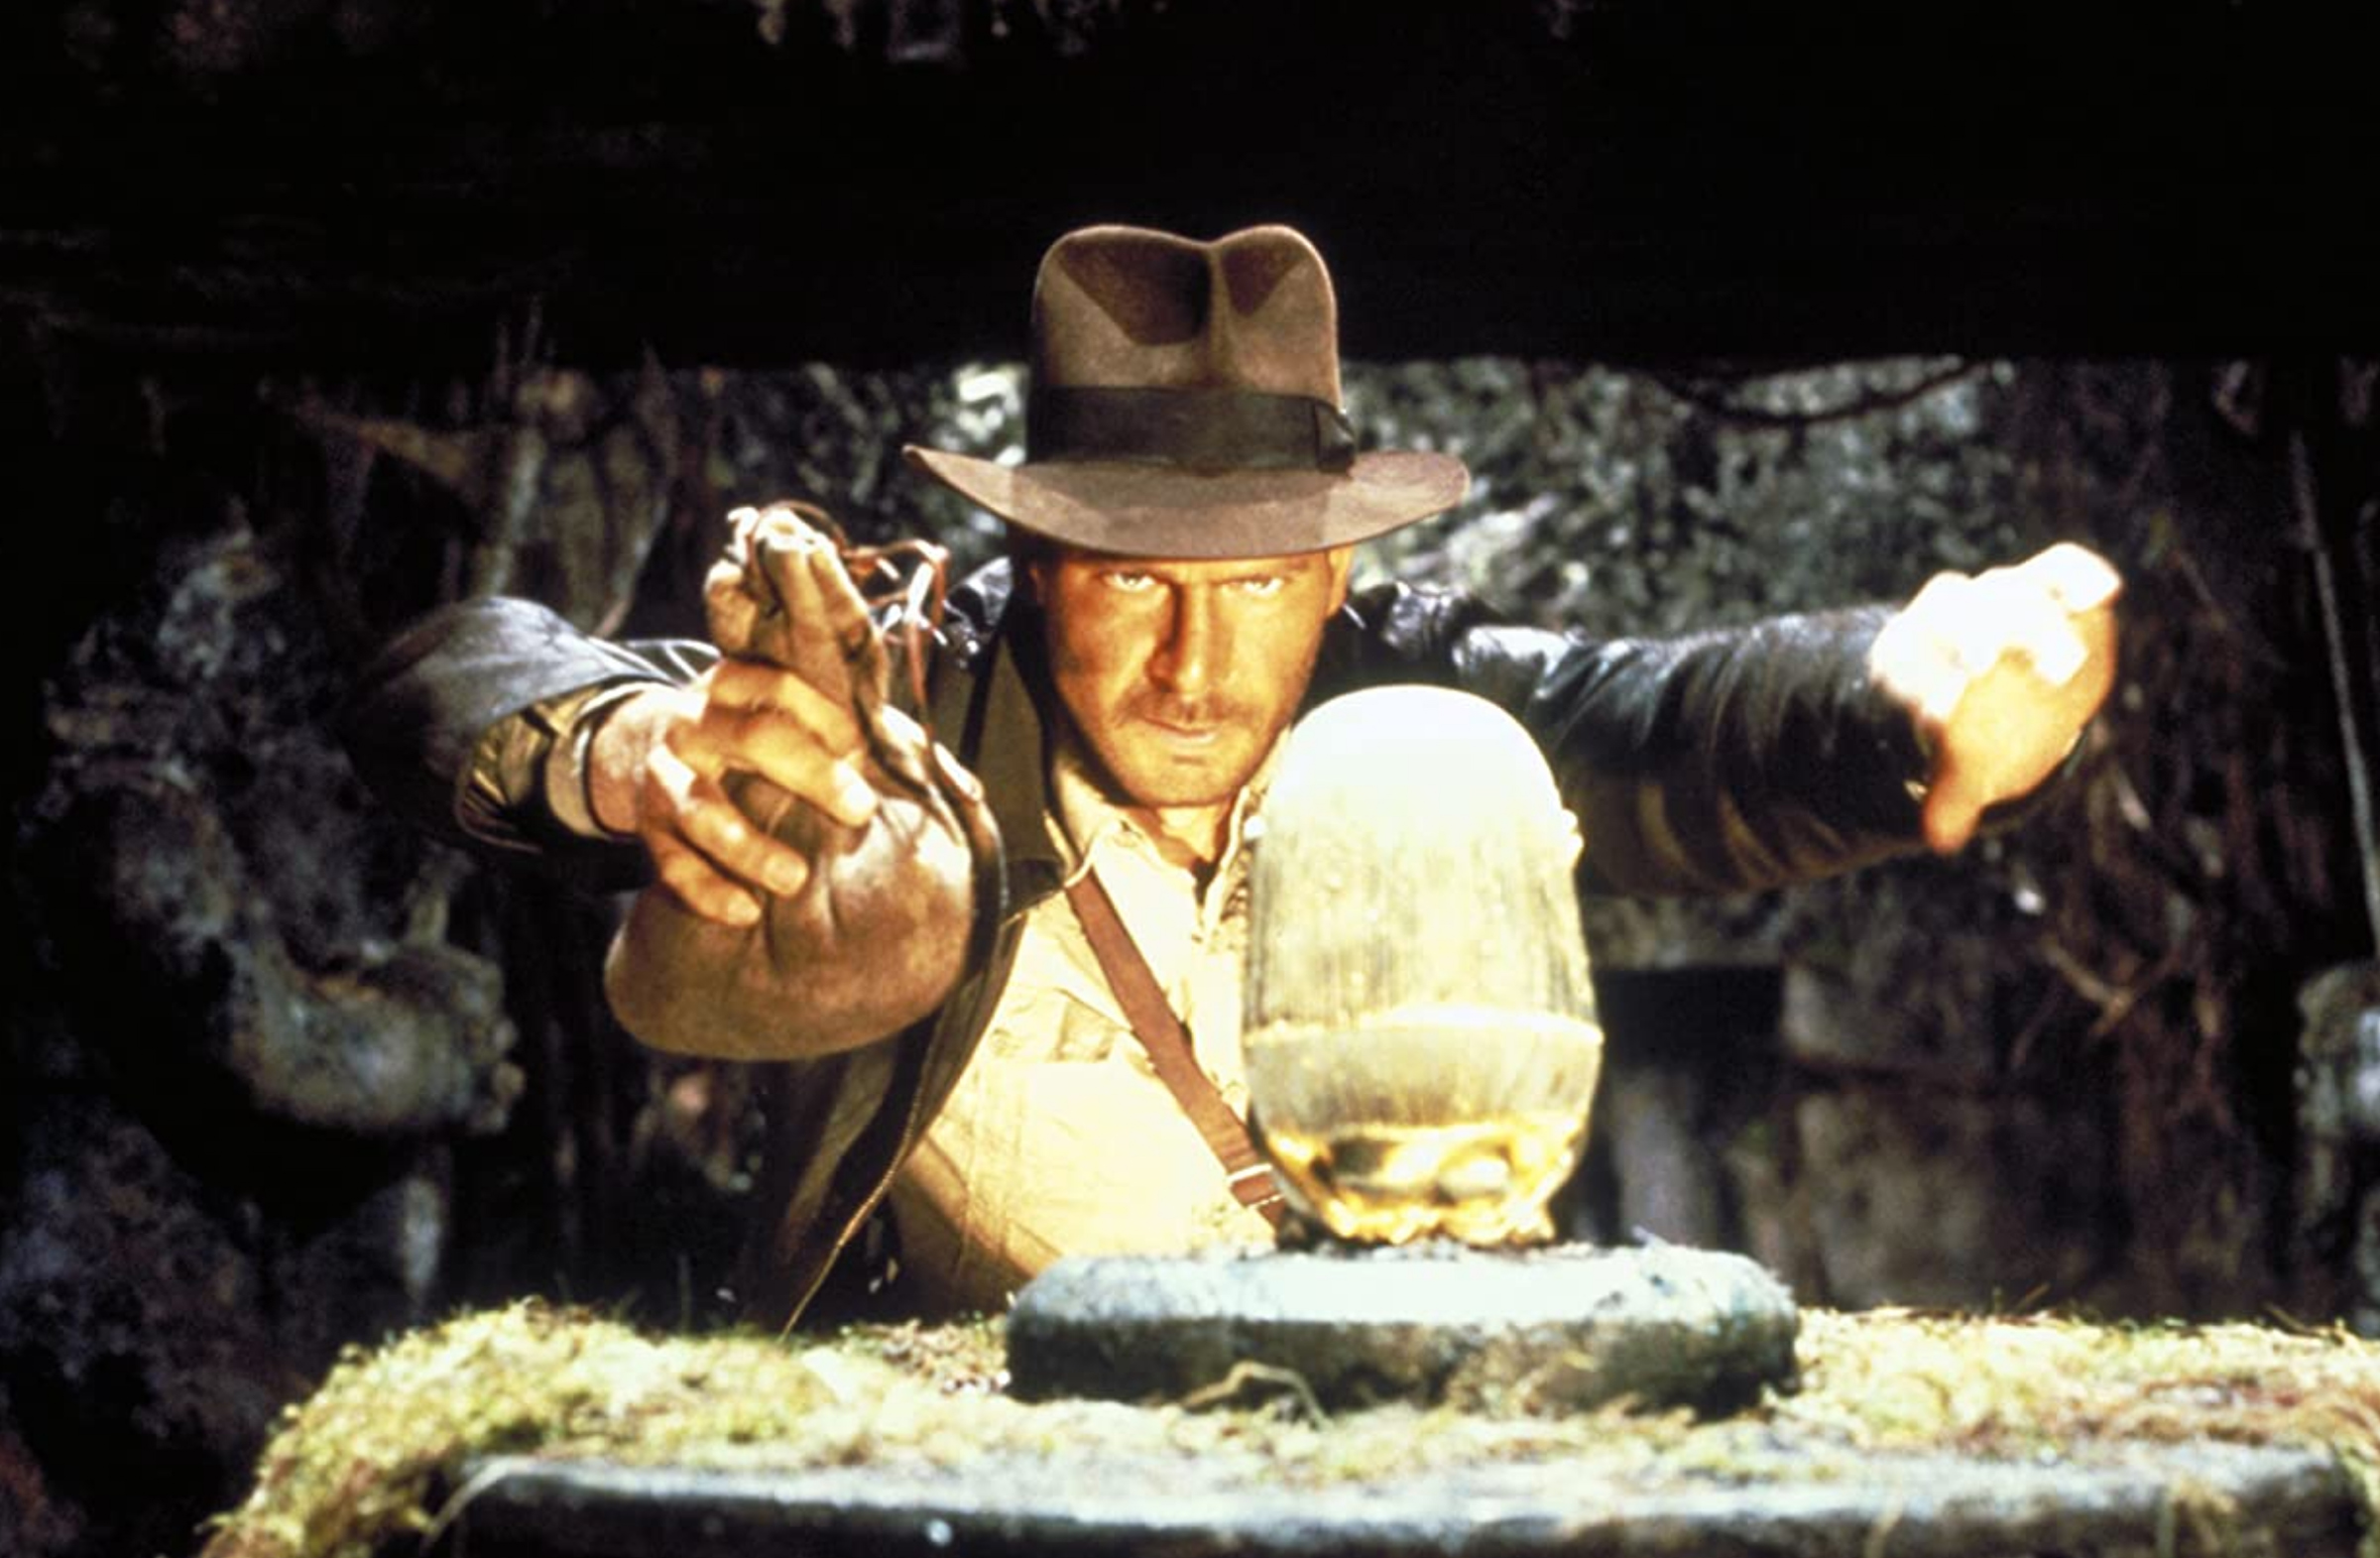 Harrison Ford in “Raiders of the Lost Ark” (1981)